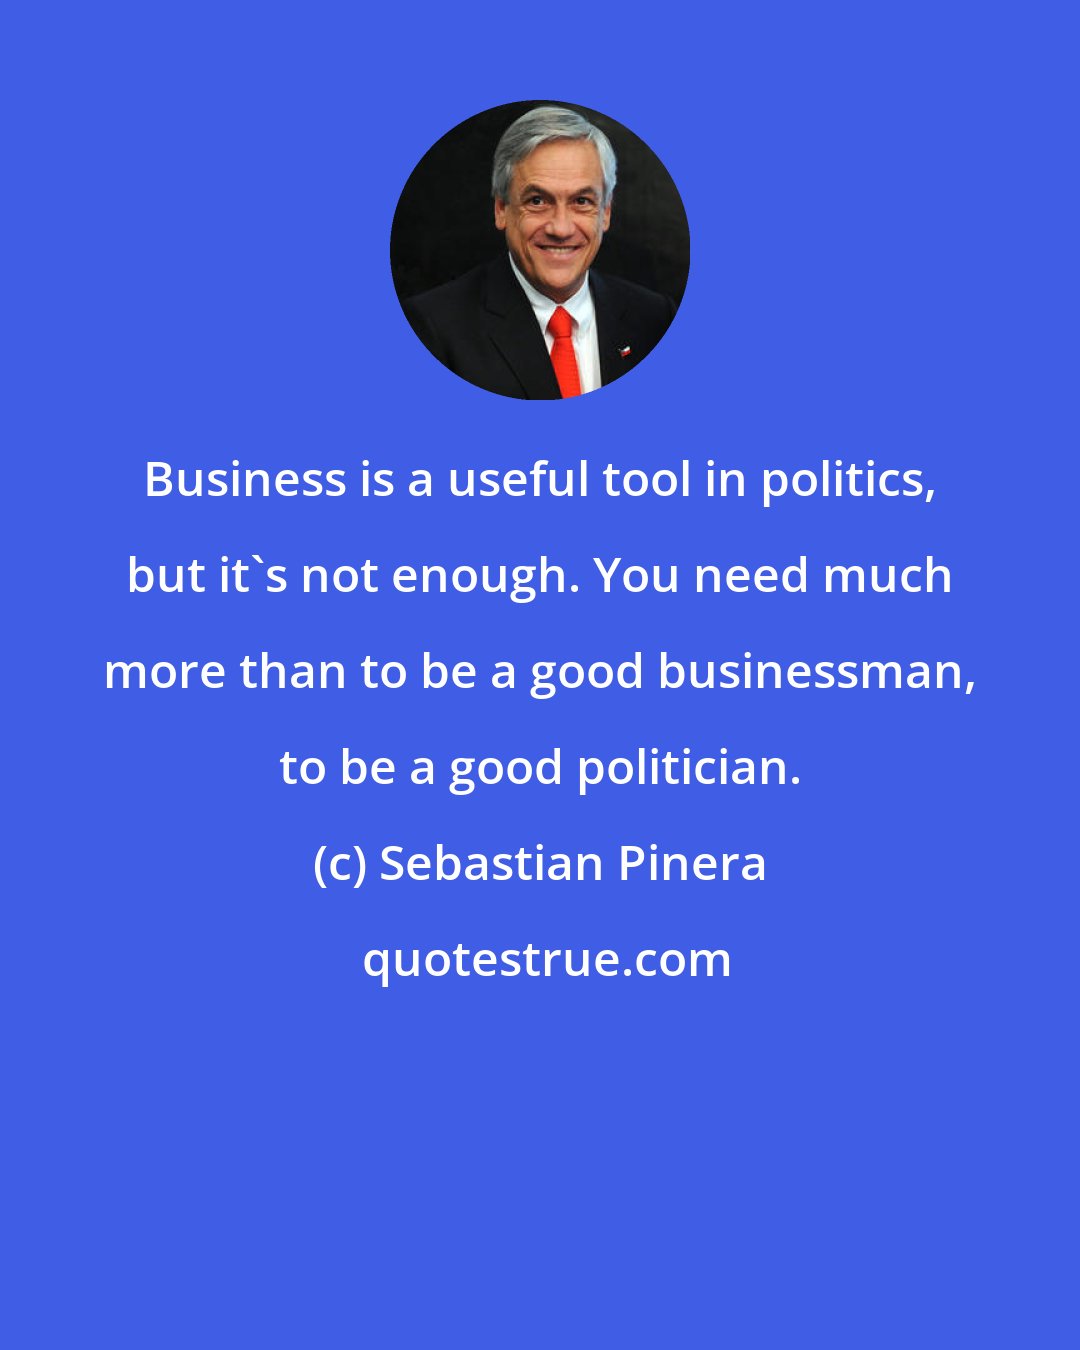 Sebastian Pinera: Business is a useful tool in politics, but it's not enough. You need much more than to be a good businessman, to be a good politician.